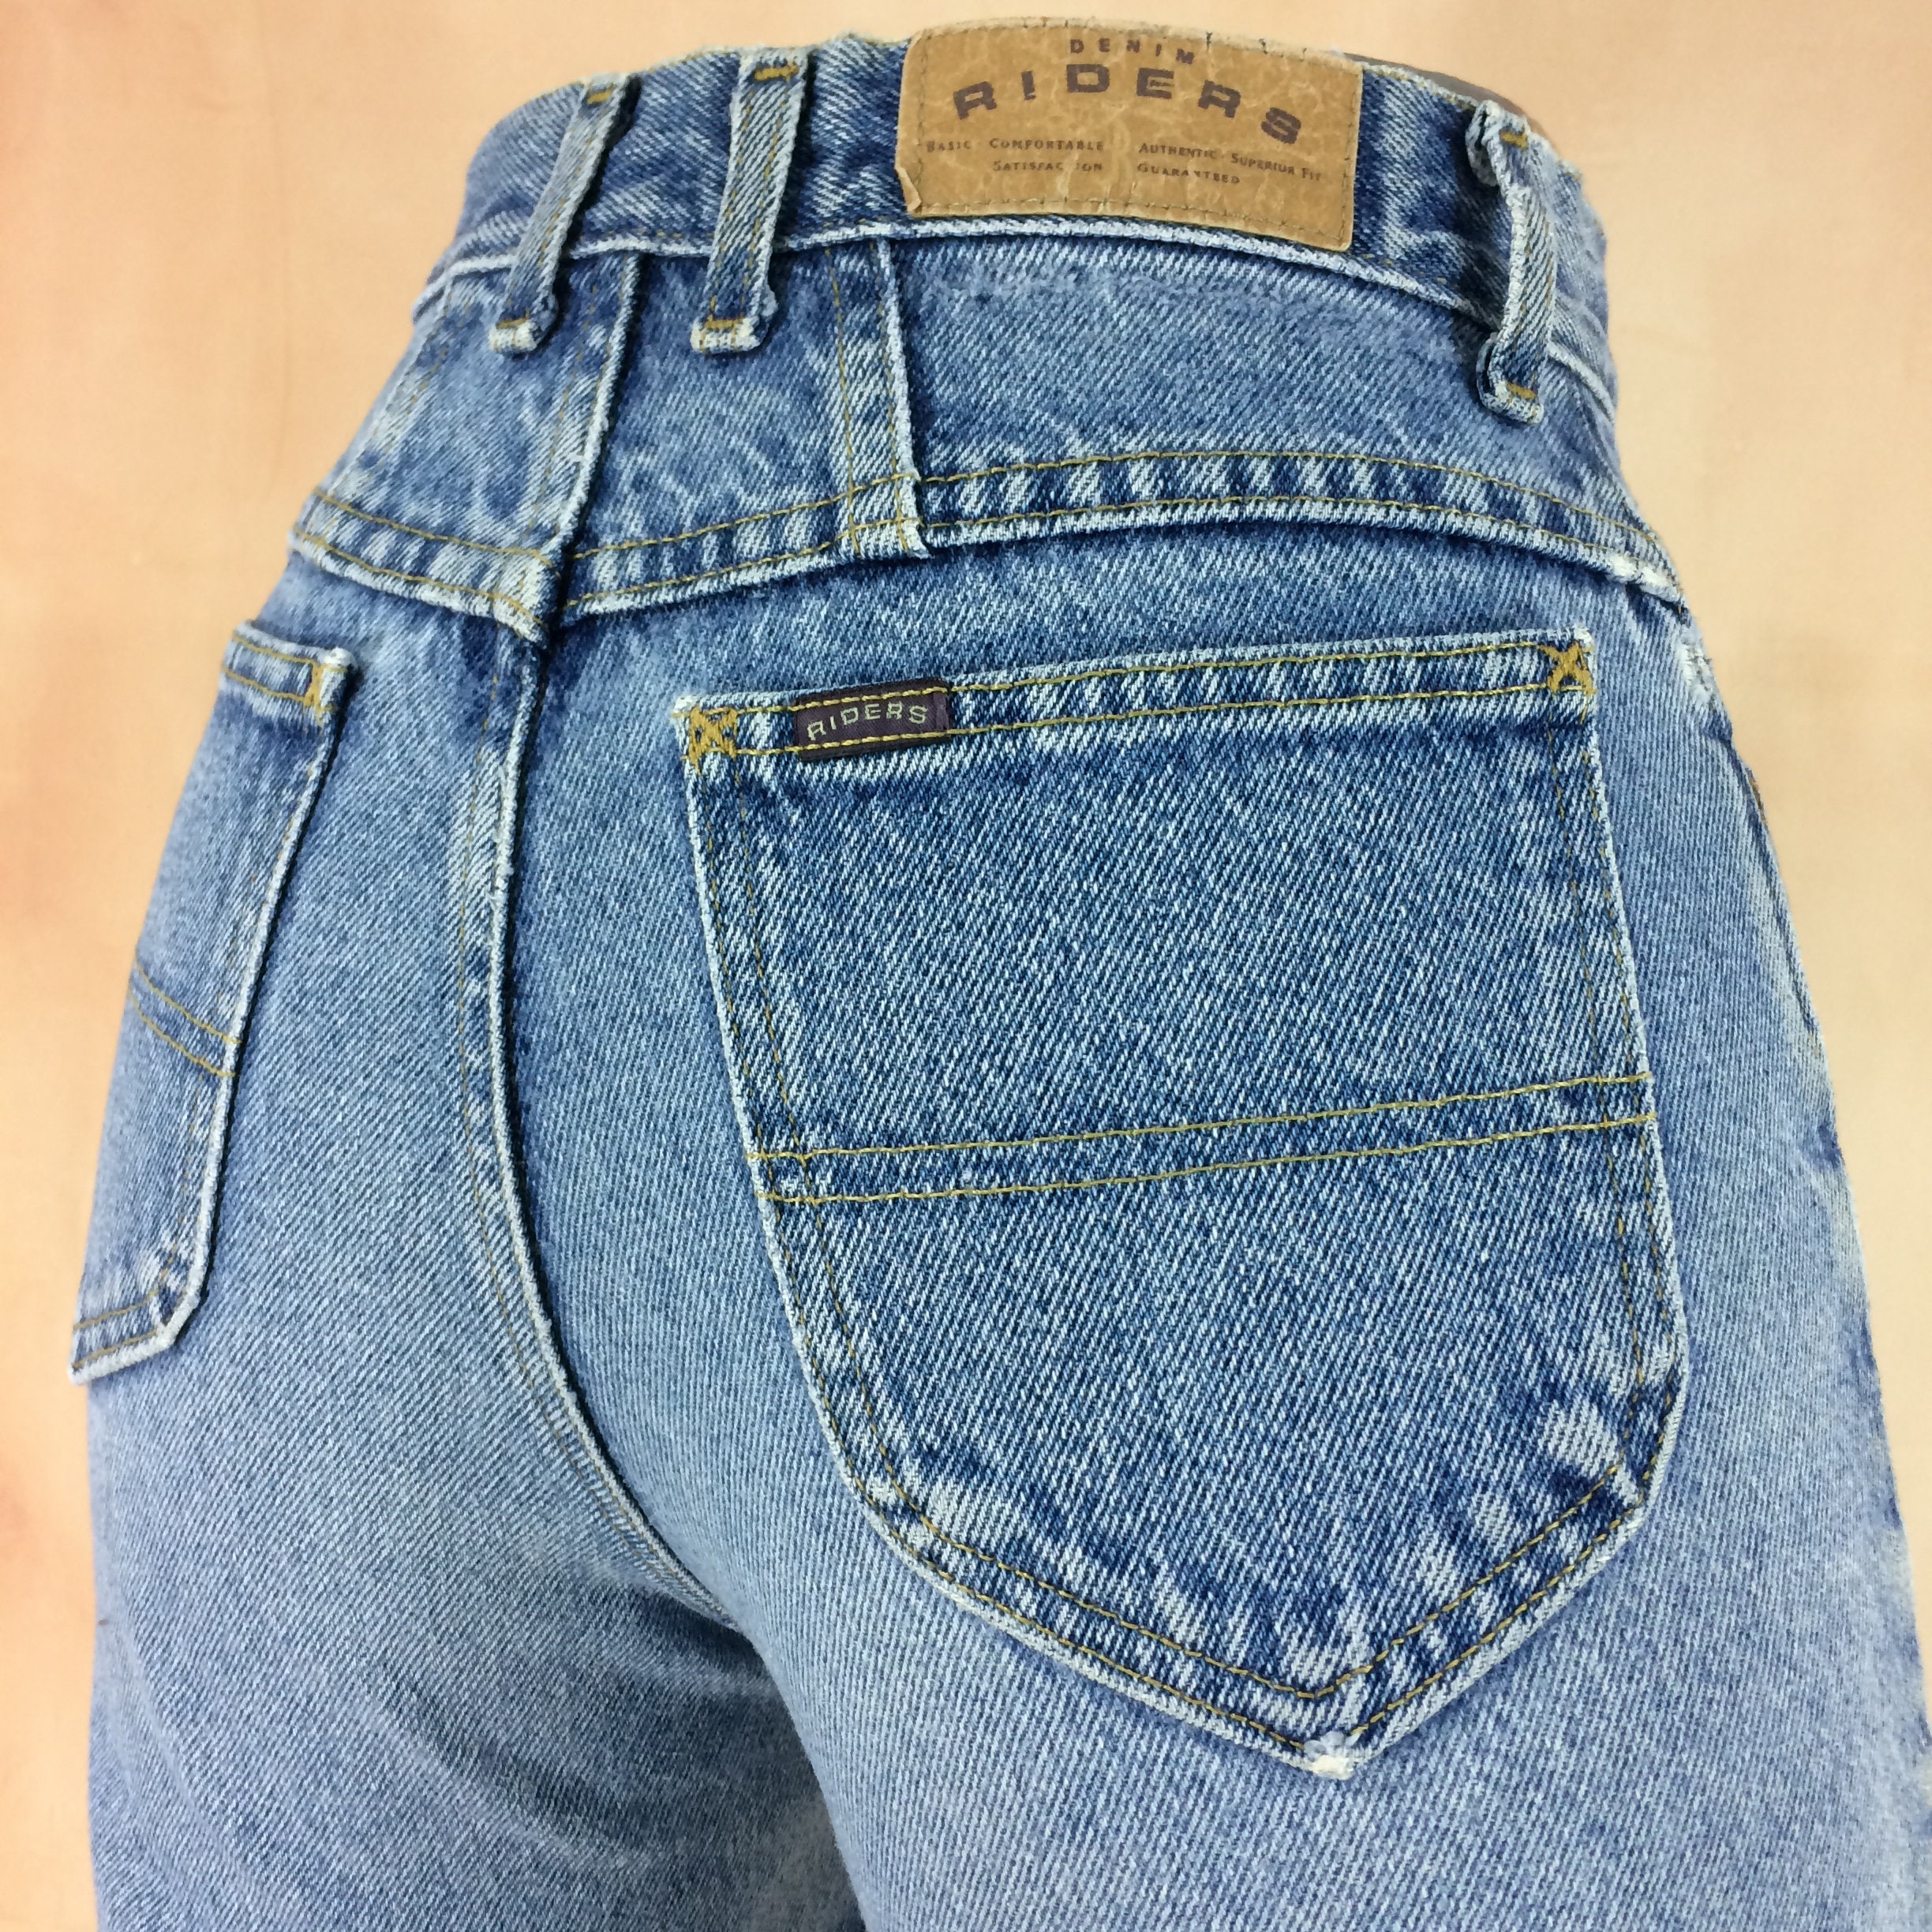 Size 25 Riders Vintage Jeans W25 L29 High Waisted 90's Western Hourglass  Jeans Girlfriends Jeans Classic Mom Jeans Made in USA Waist 25 -  New  Zealand